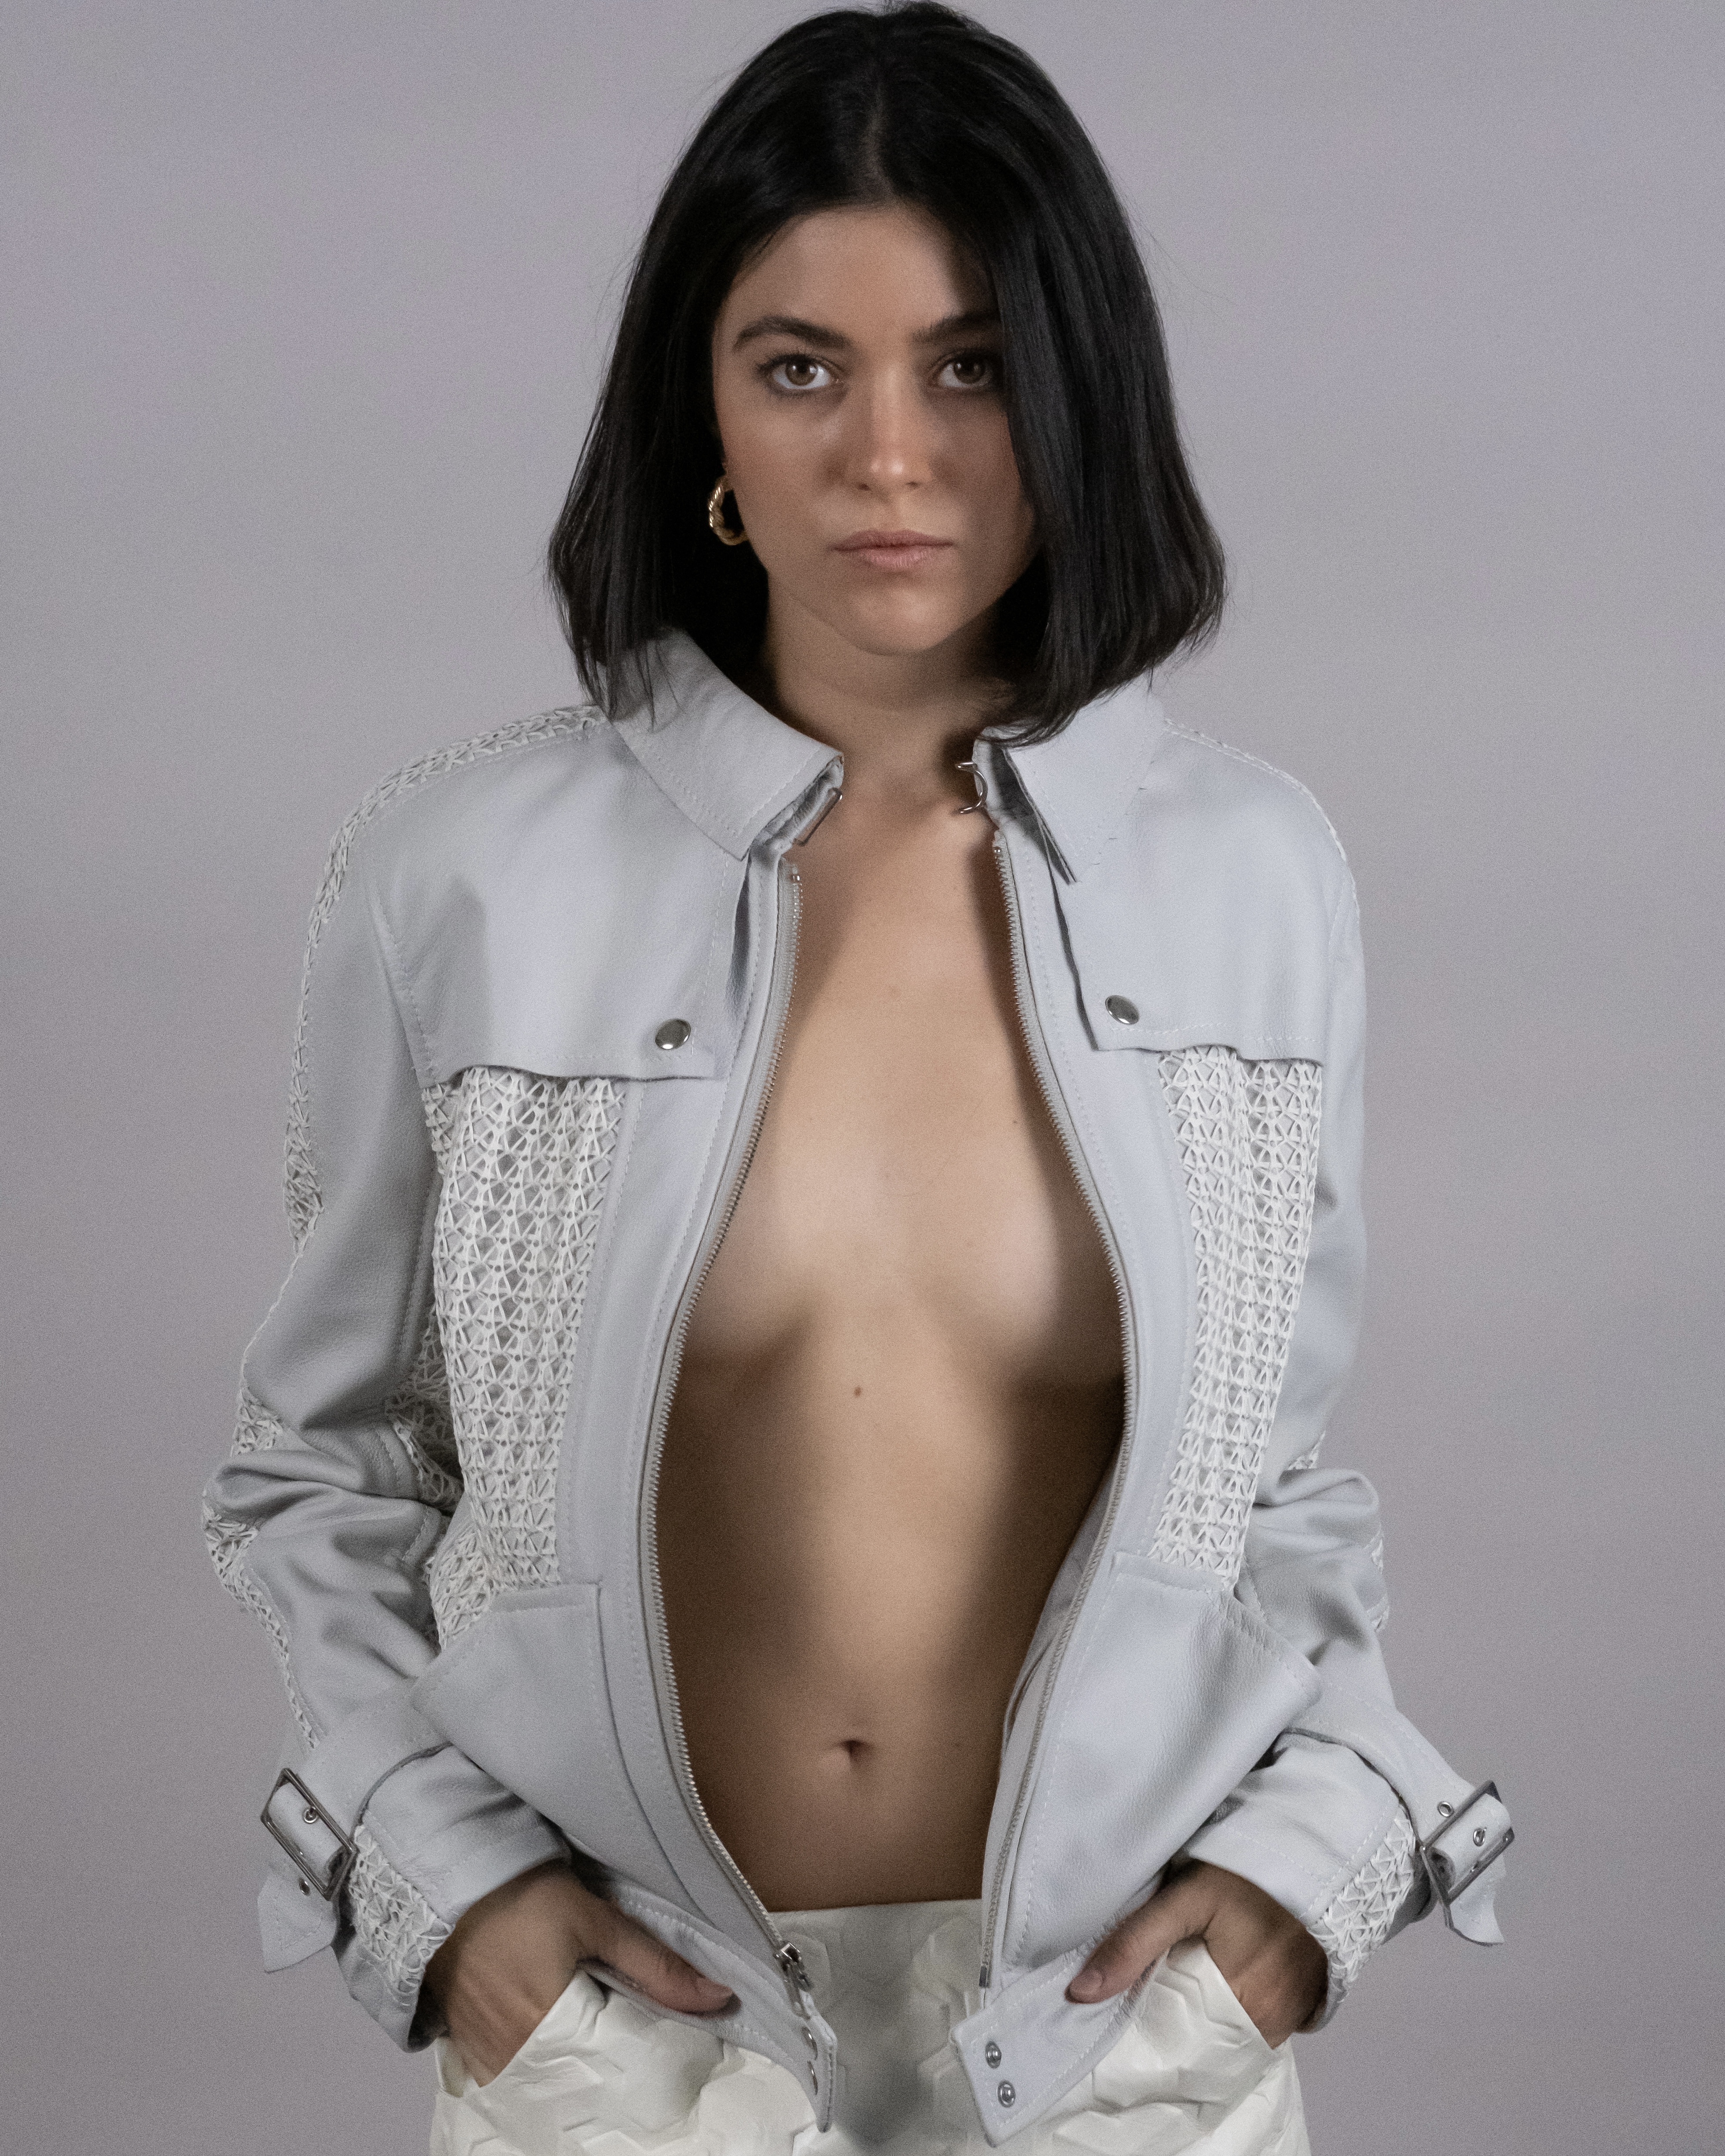 Leather and mesh jacket modeled by Lauren Corcoran